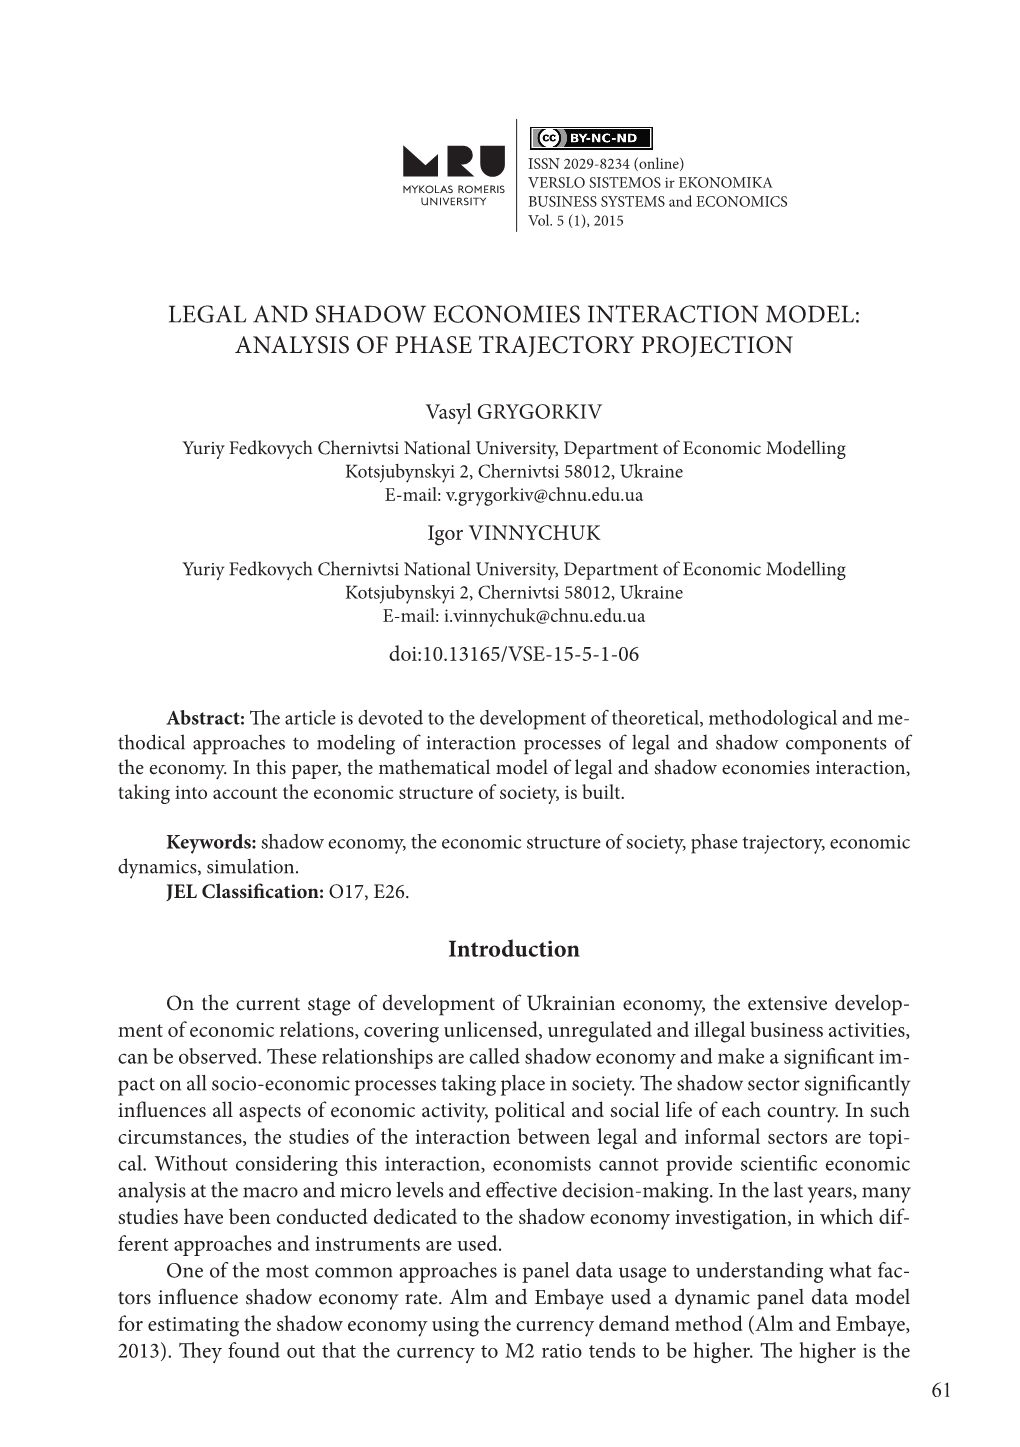 Legal and Shadow Economies Interaction Model: Analysis of Phase Trajectory Projection